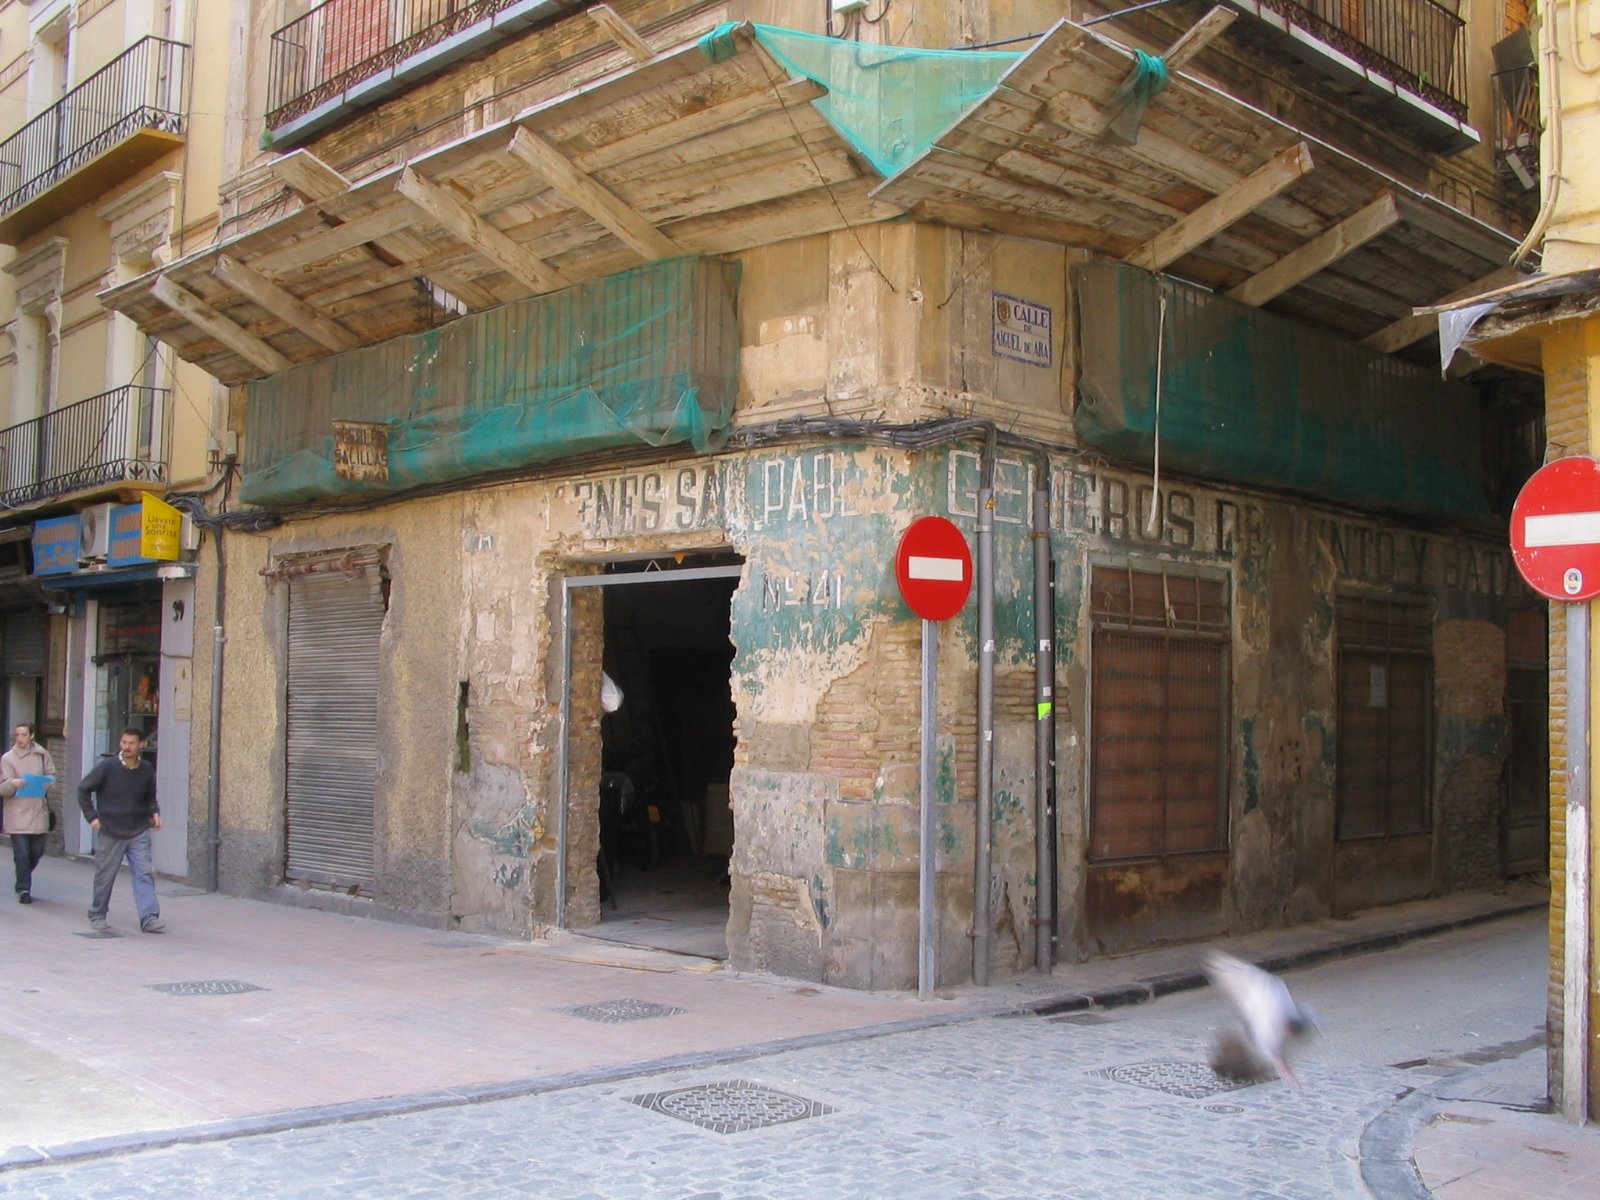 an old building in an alley between two stores